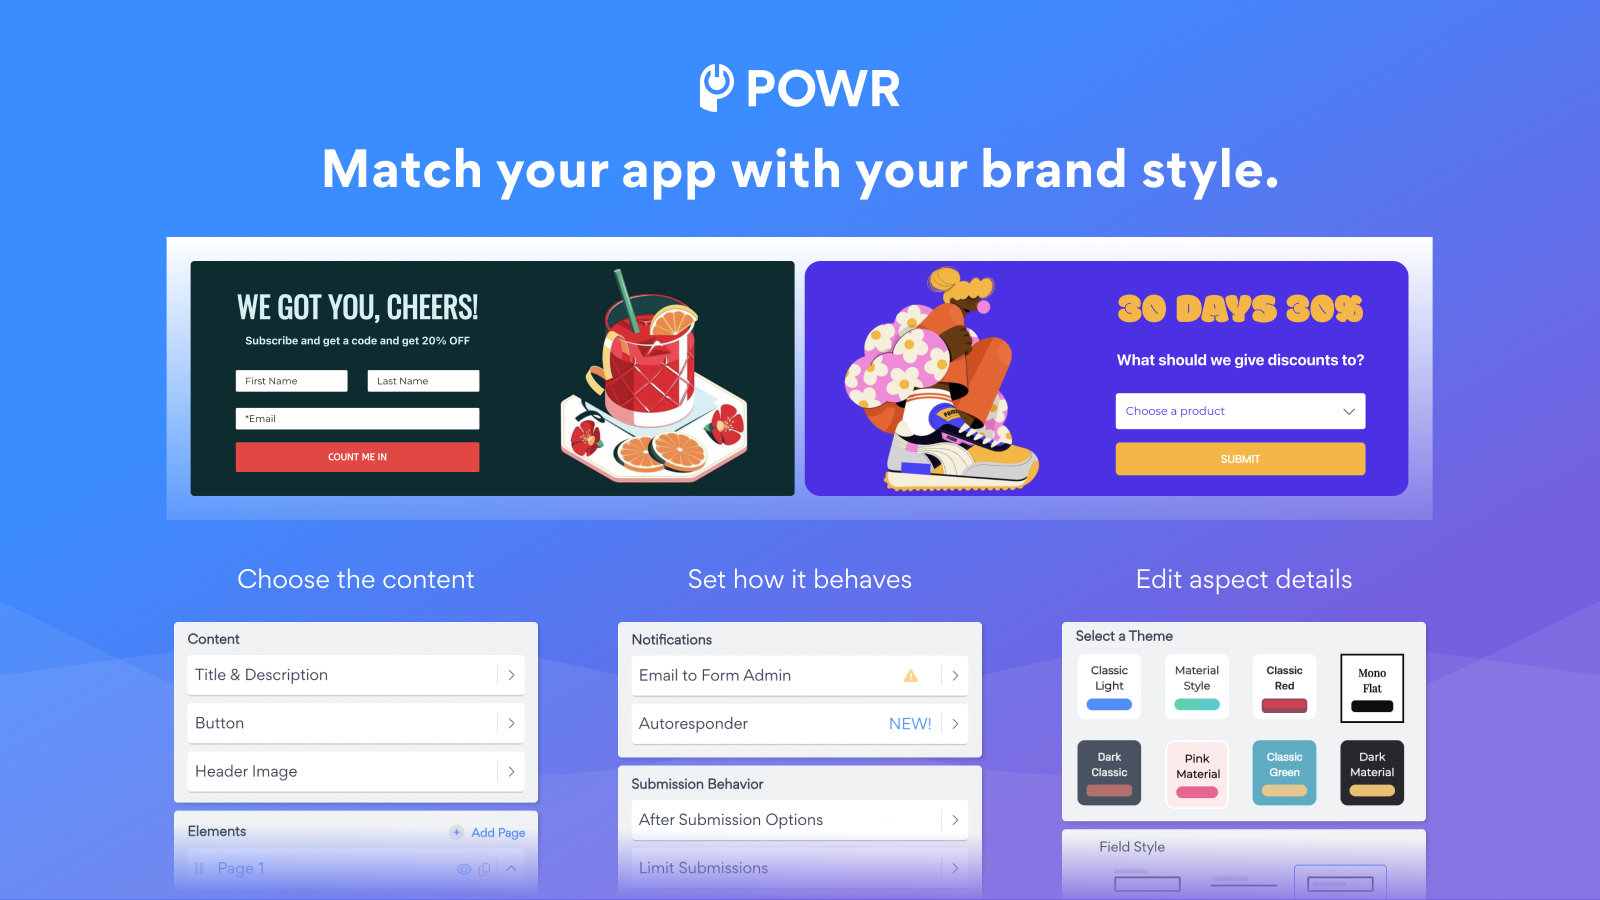 Match your app with your brand style.